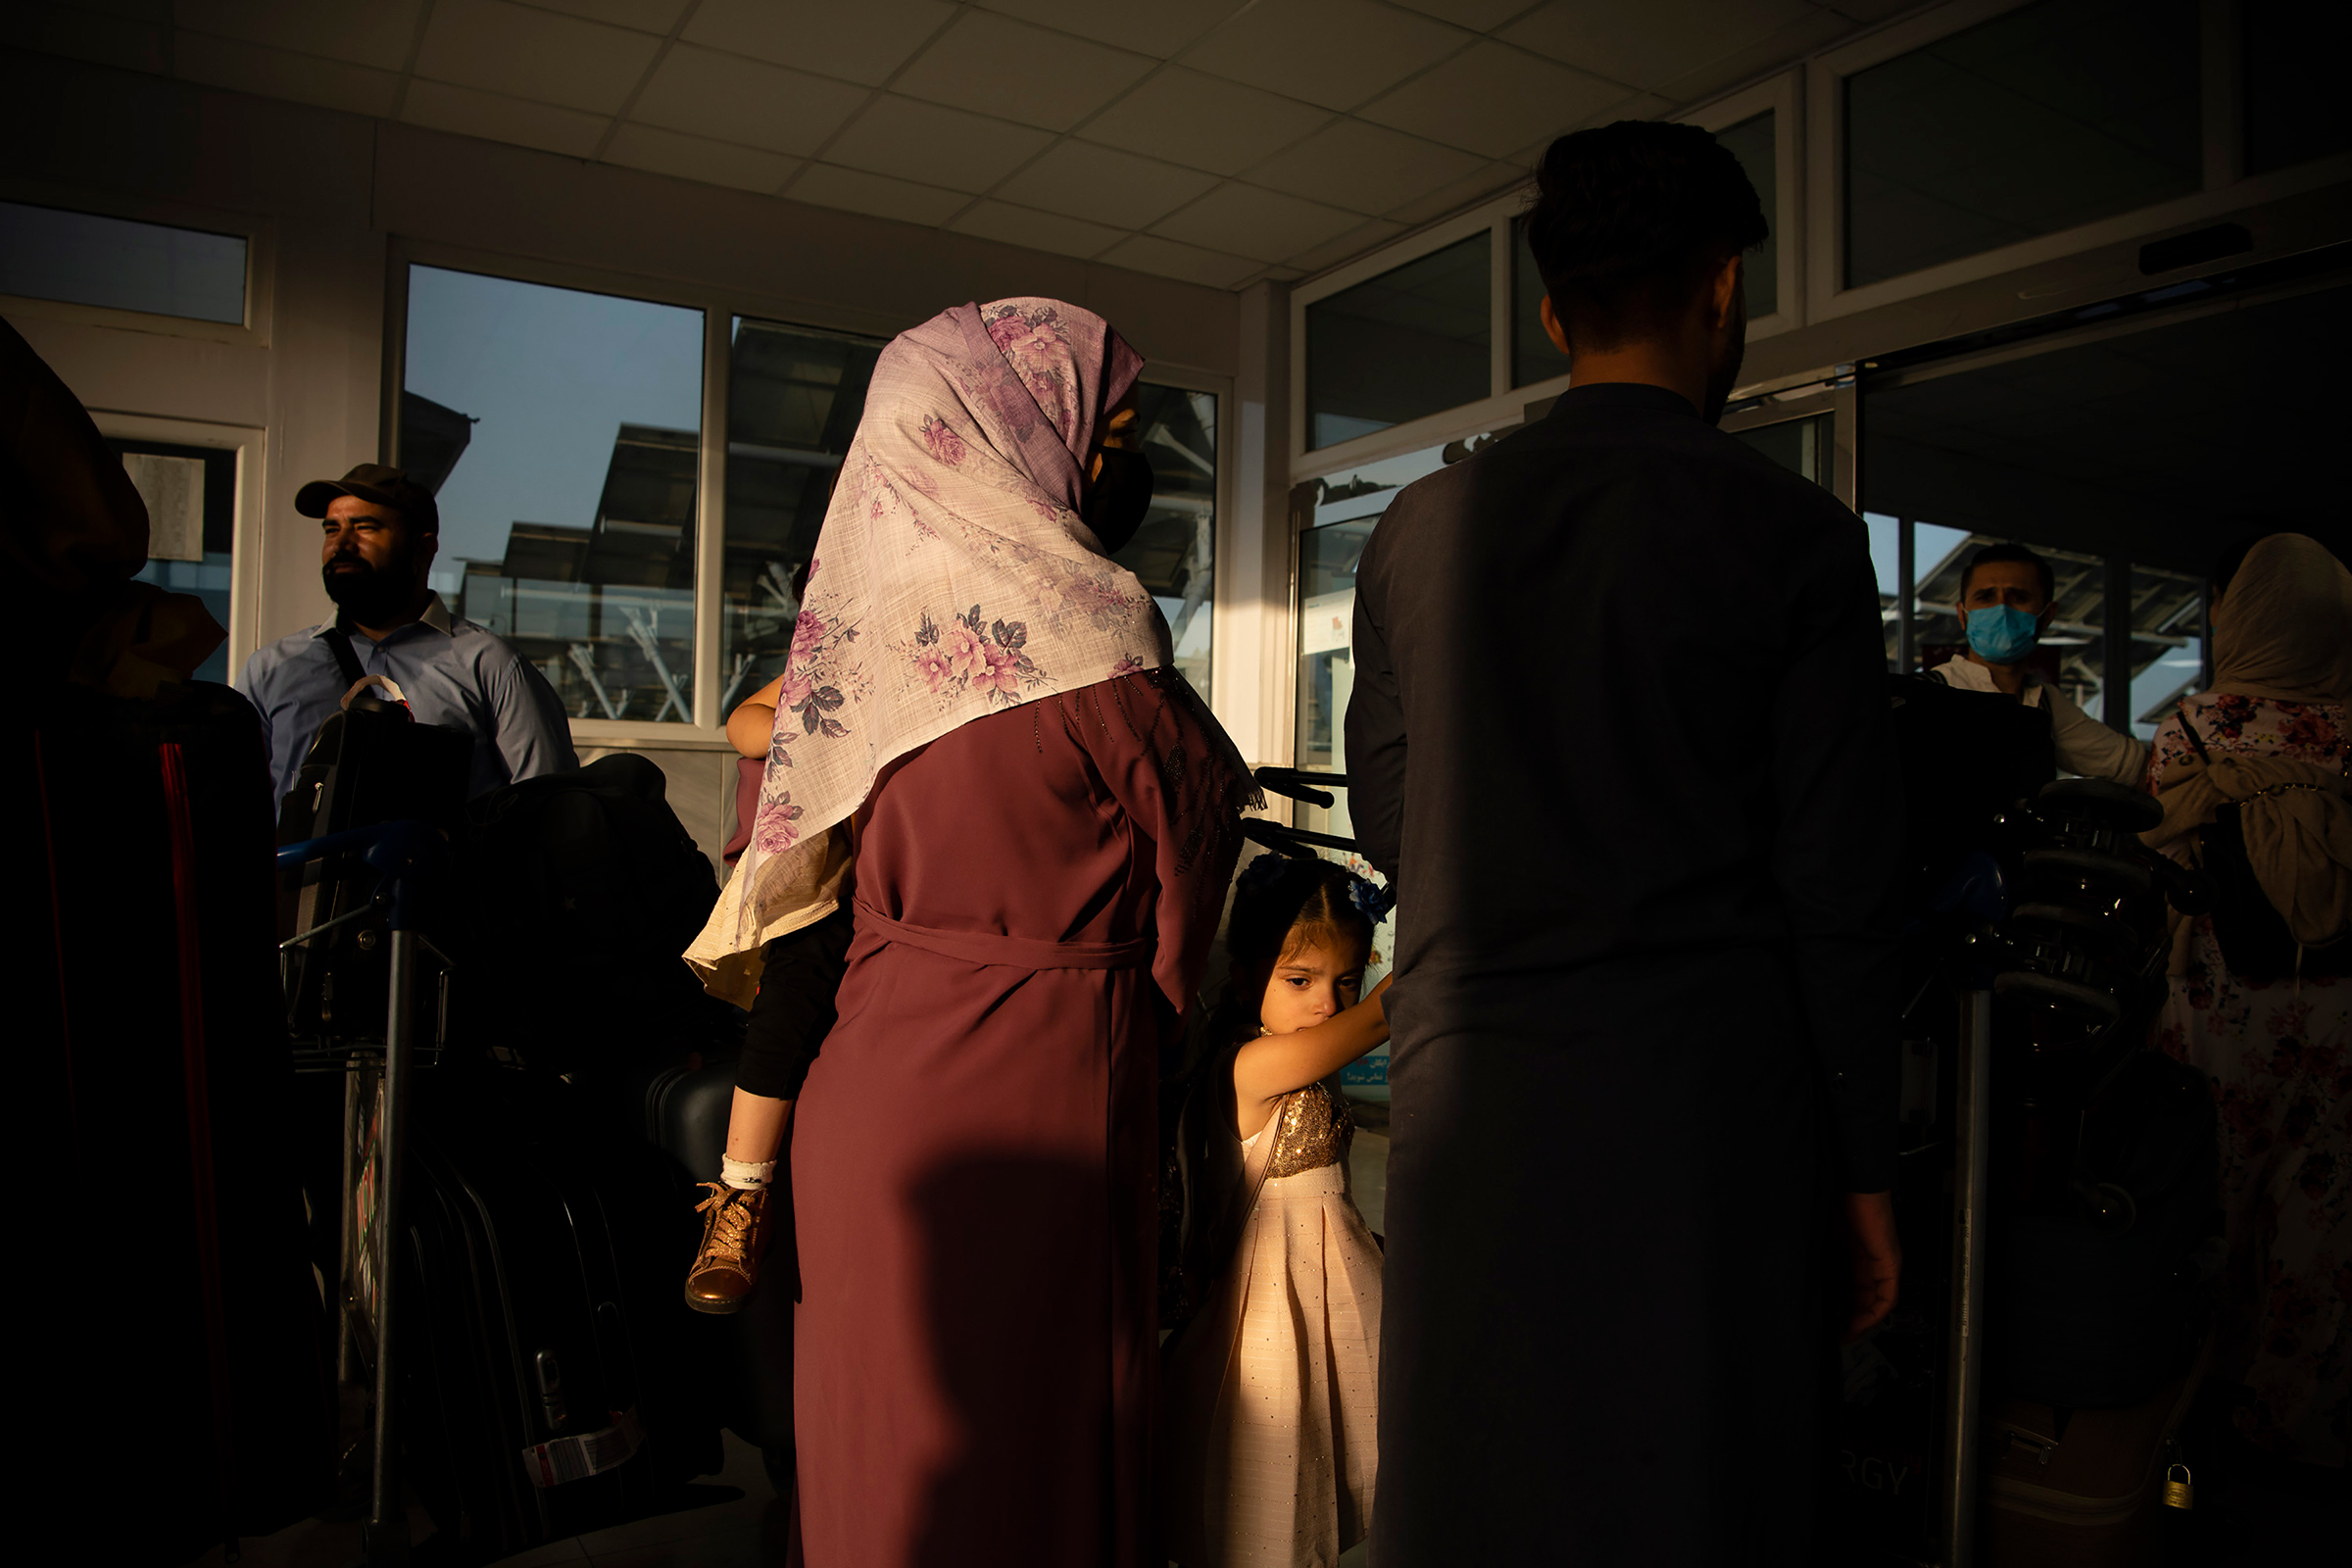 Ahead of the Taliban's arrival, Afghans and travelers pass through checkpoints at Hamid Karzai International Airport in Kabul on Aug. 15. (Kiana Hayeri—The New York Times/Redux)